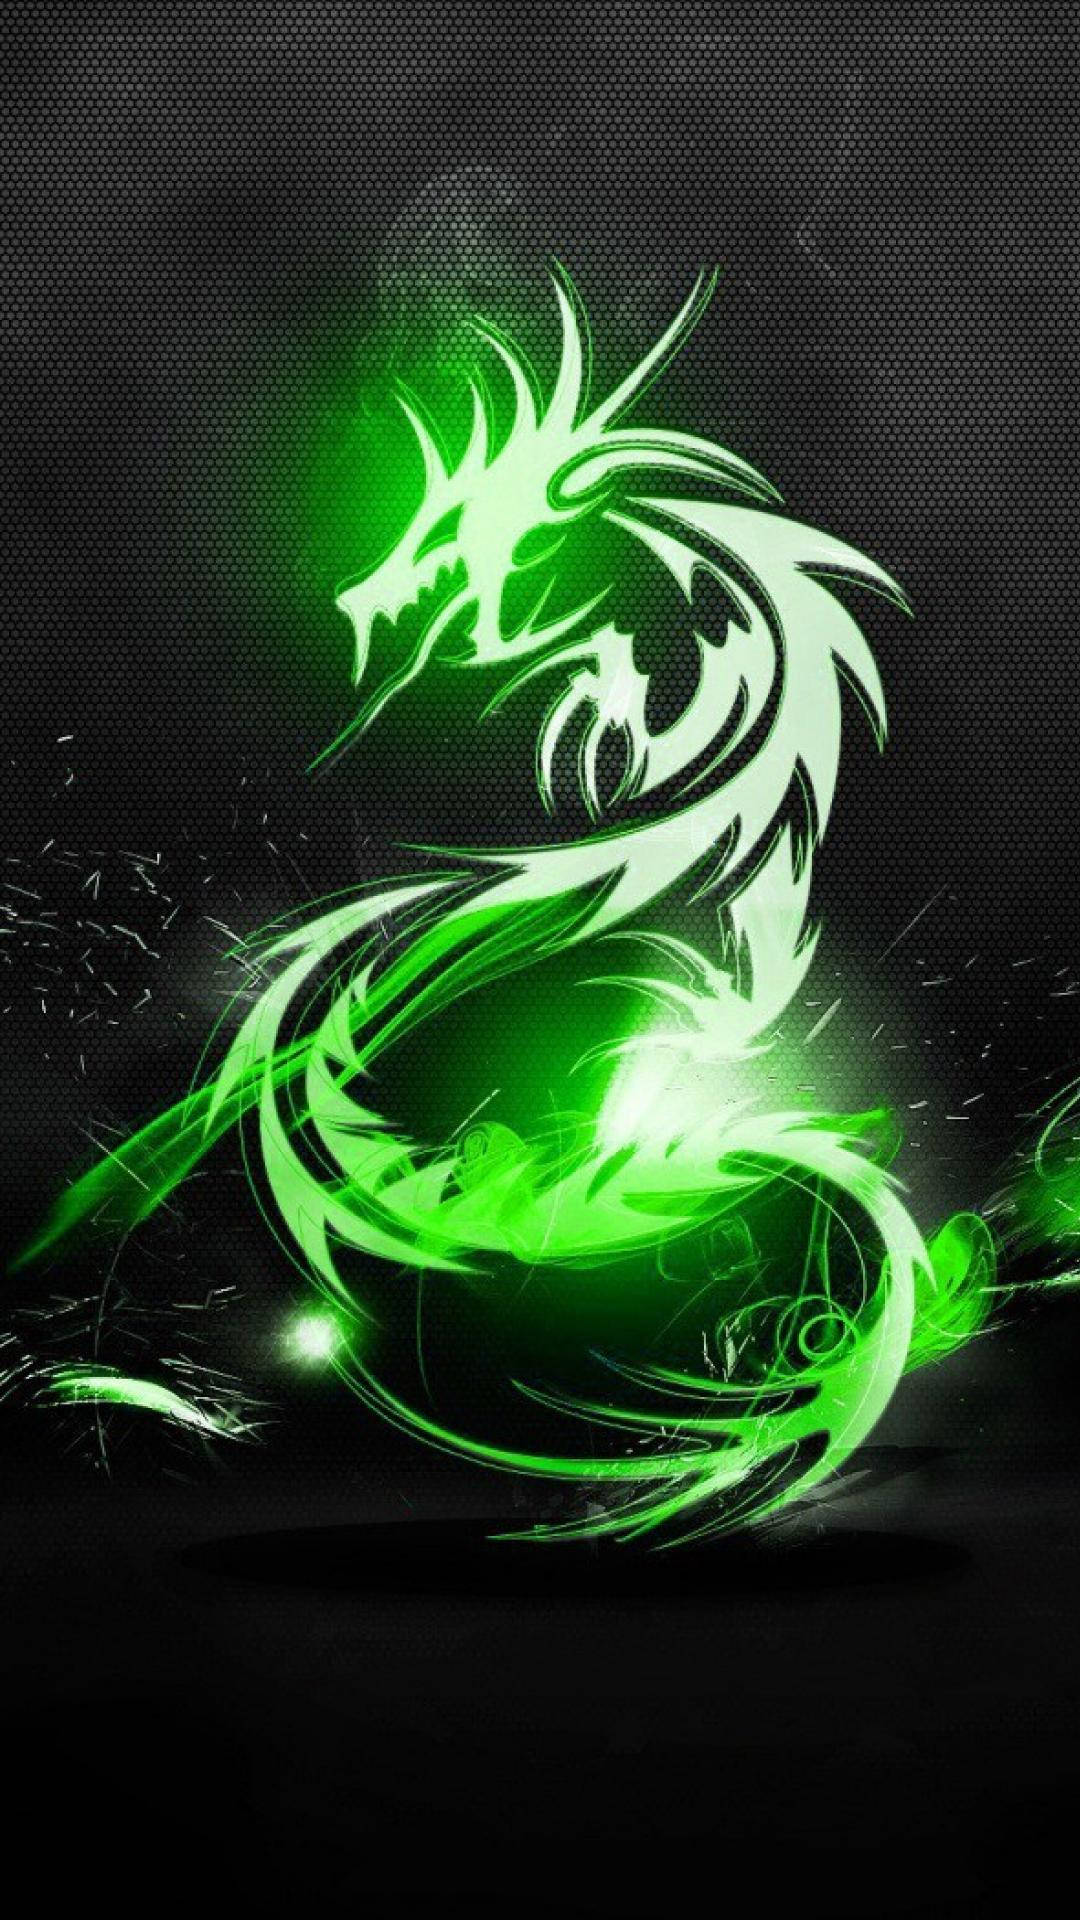 Green Dragon iPhone Wallpaper with high-resolution 1080x1920 pixel. You can use this wallpaper for your iPhone 5, 6, 7, 8, X, XS, XR backgrounds, Mobile Screensaver, or iPad Lock Screen - Lime green